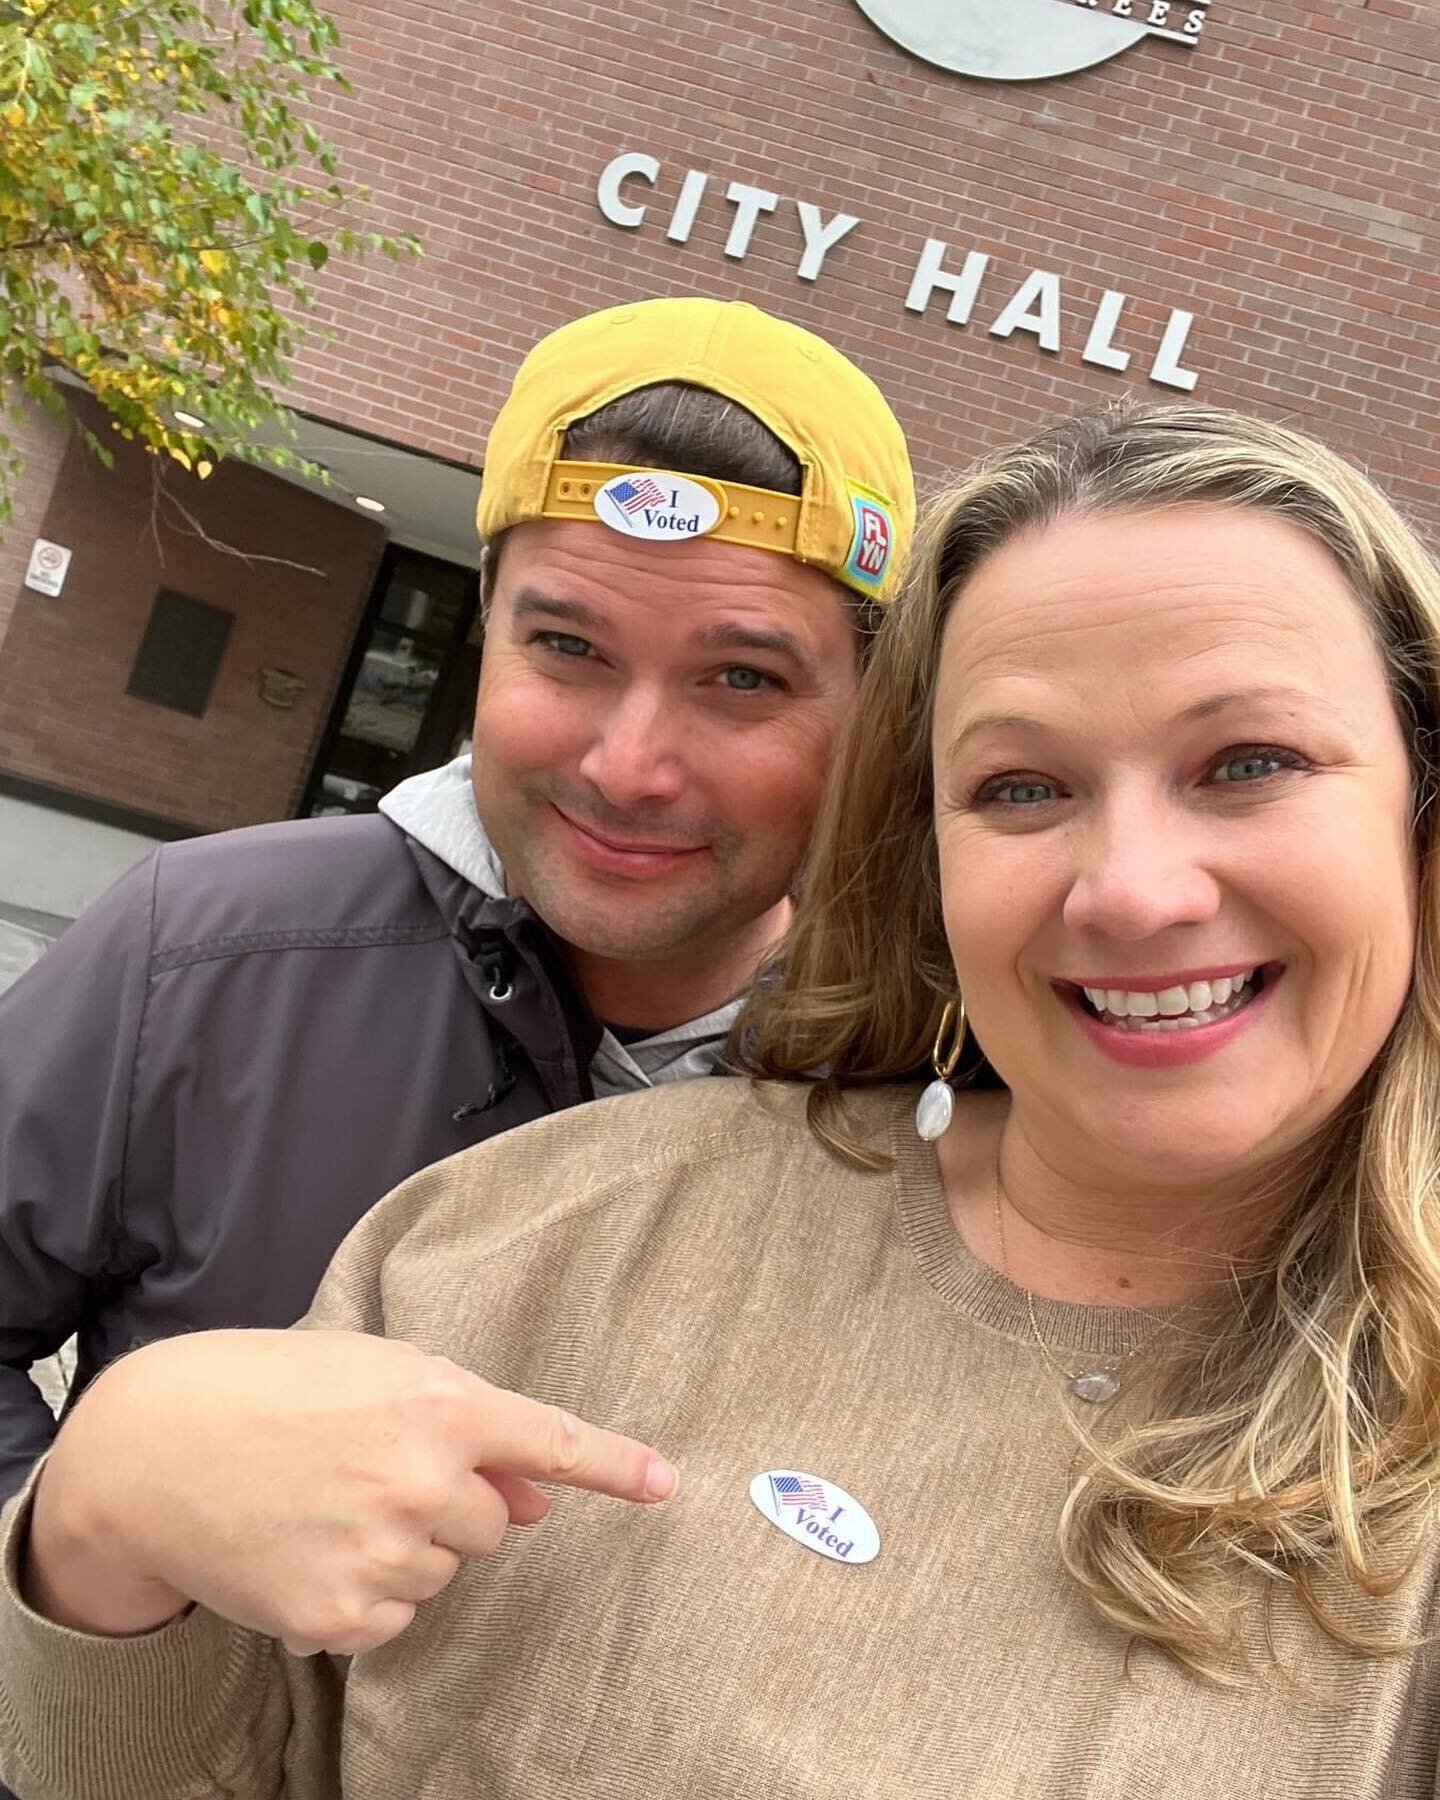 Meredith Stead has voted &mdash; and you can too!

Early in-person voting is happening now through tomorrow (Friday, November 3rd) from 8AM-5PM at Boise City Hall and Ada County Elections.

If you're still holding on to your absentee ballot, don't ma